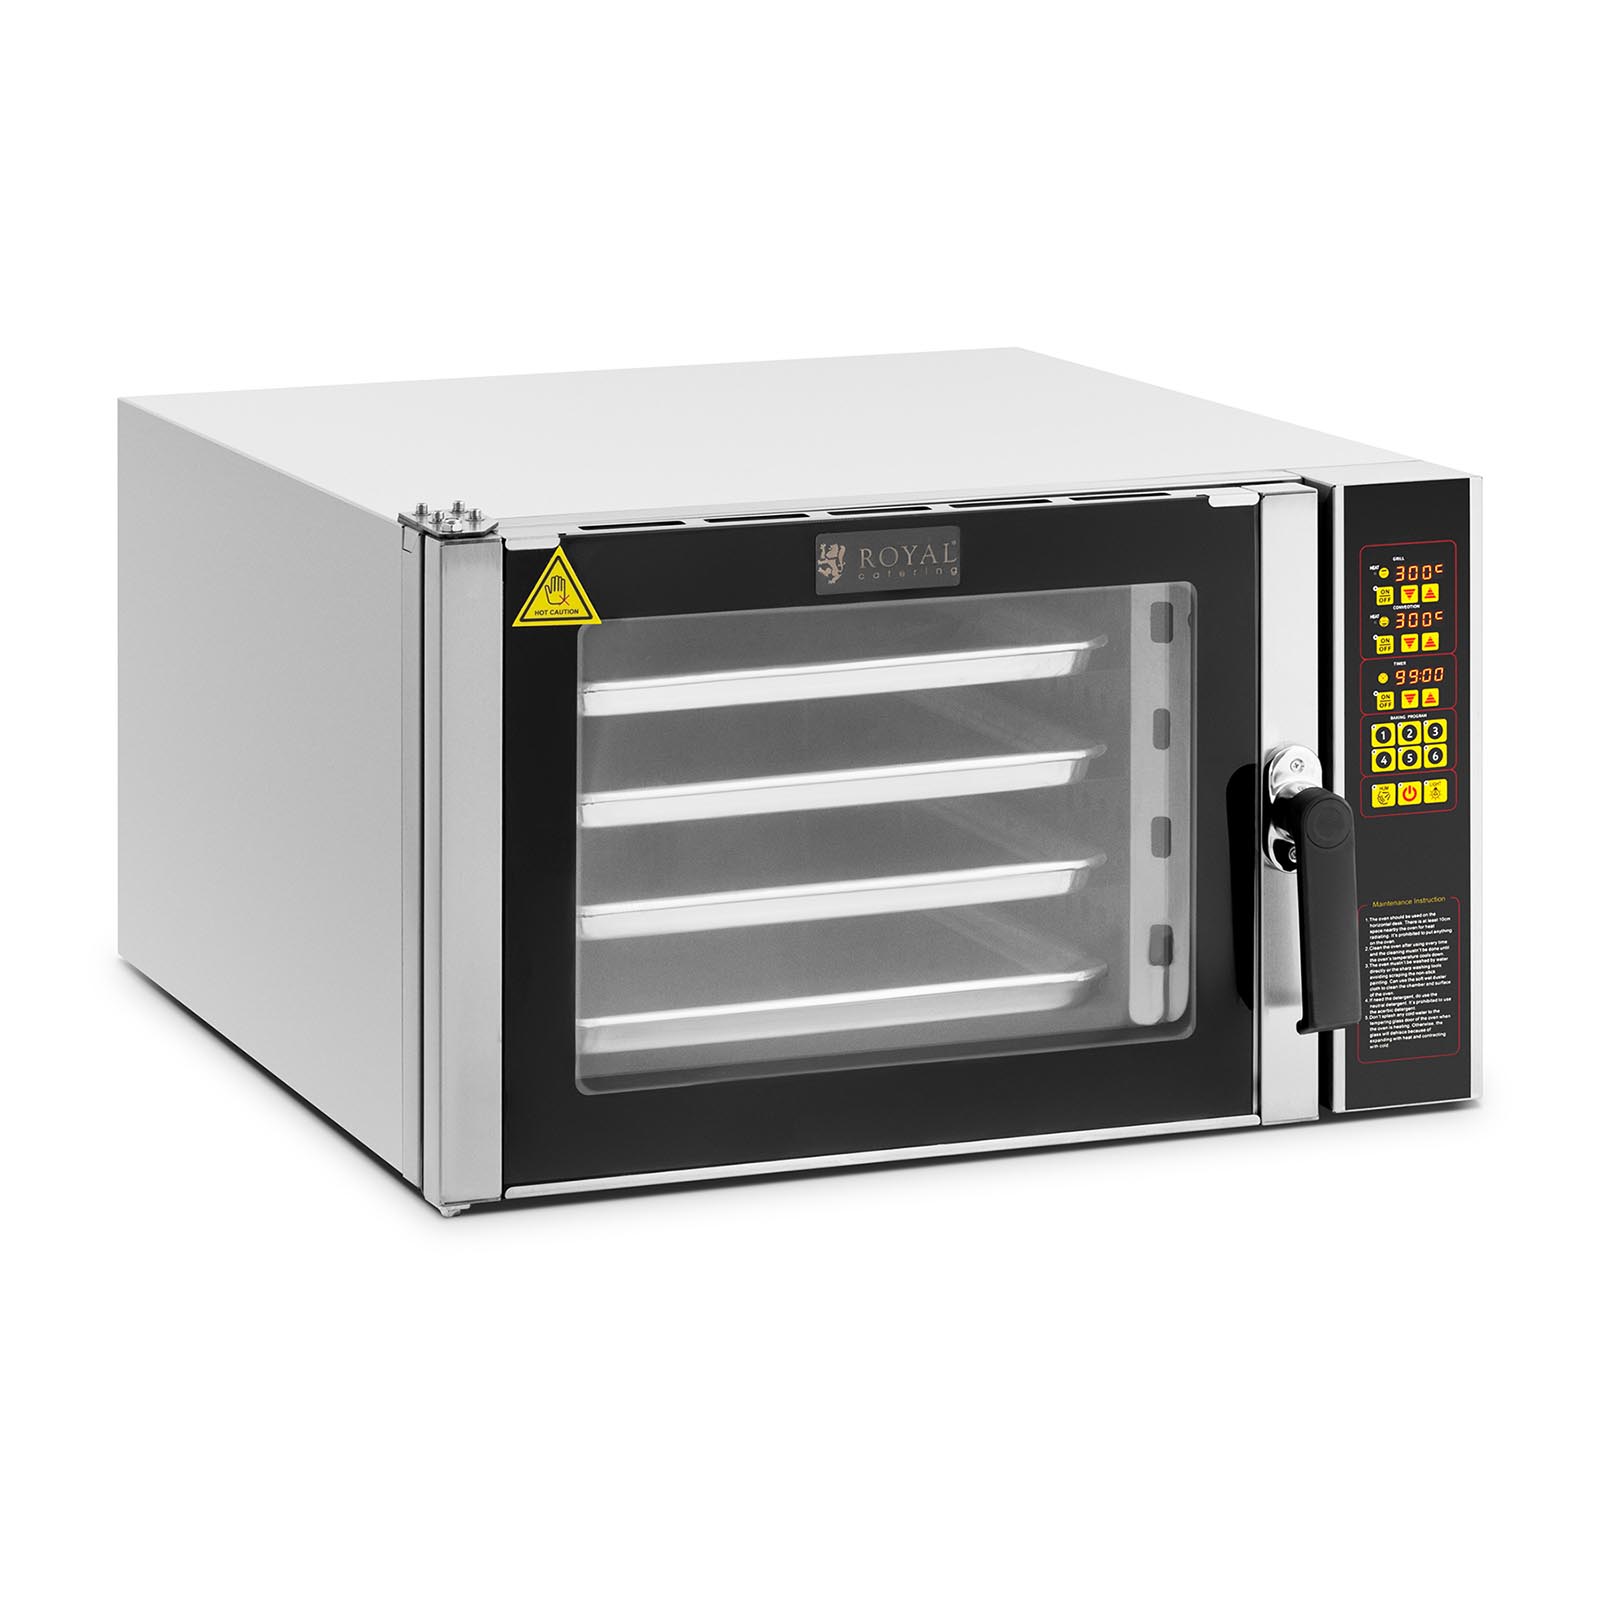 Hot air oven - 5000 W - Timer - Steam function - 4 Trays